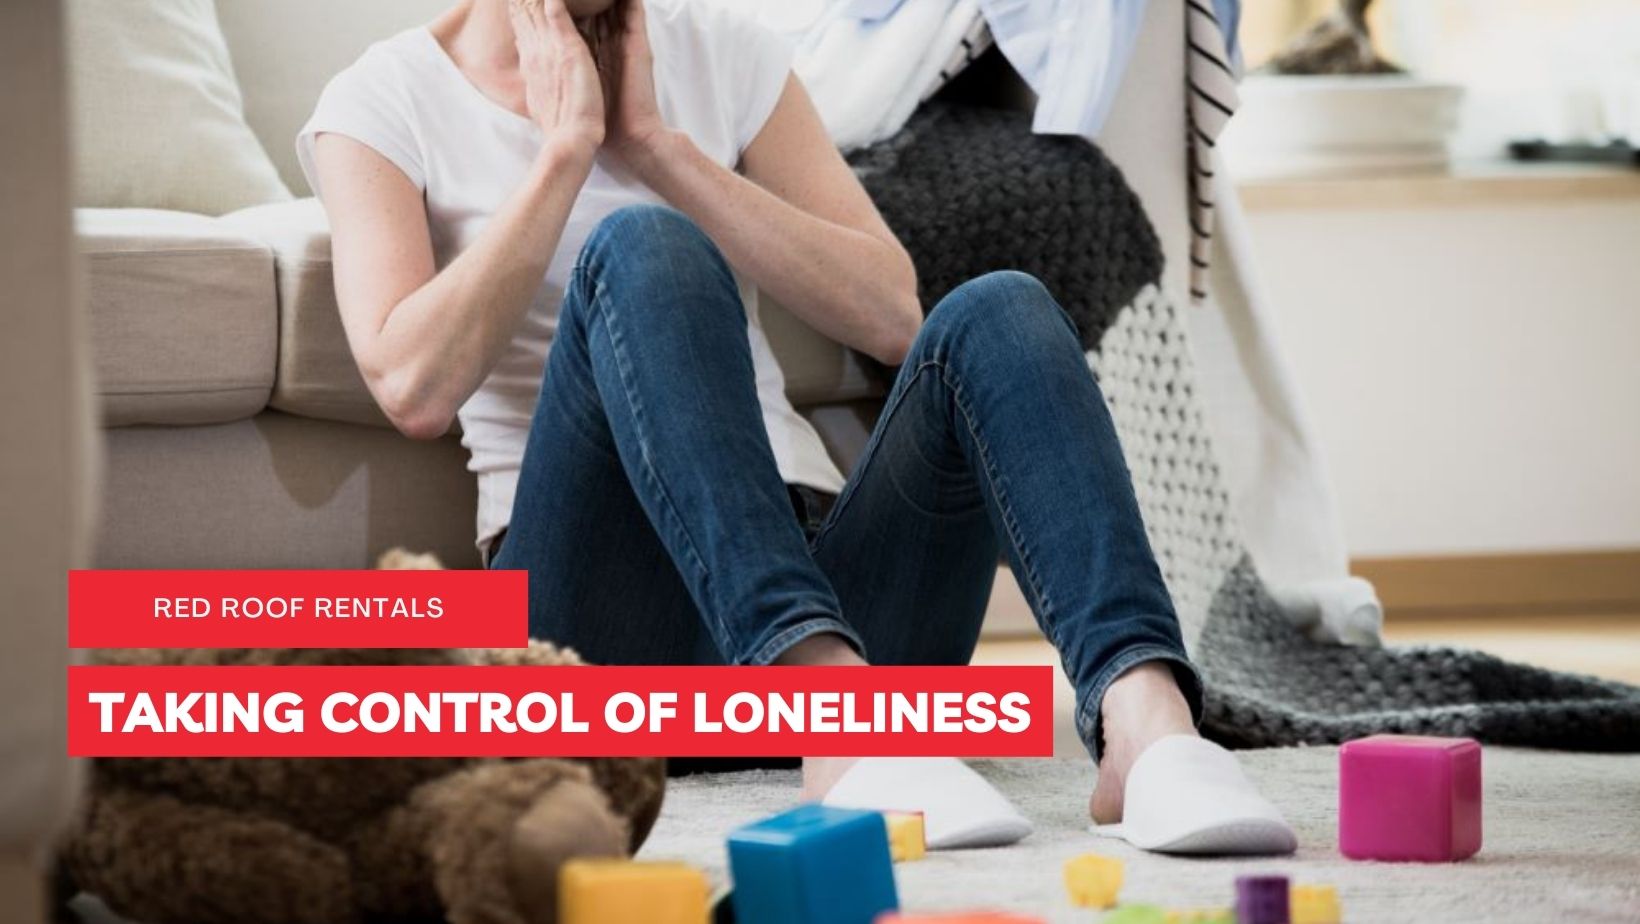 TAKING CONTROL OF LONELINESS